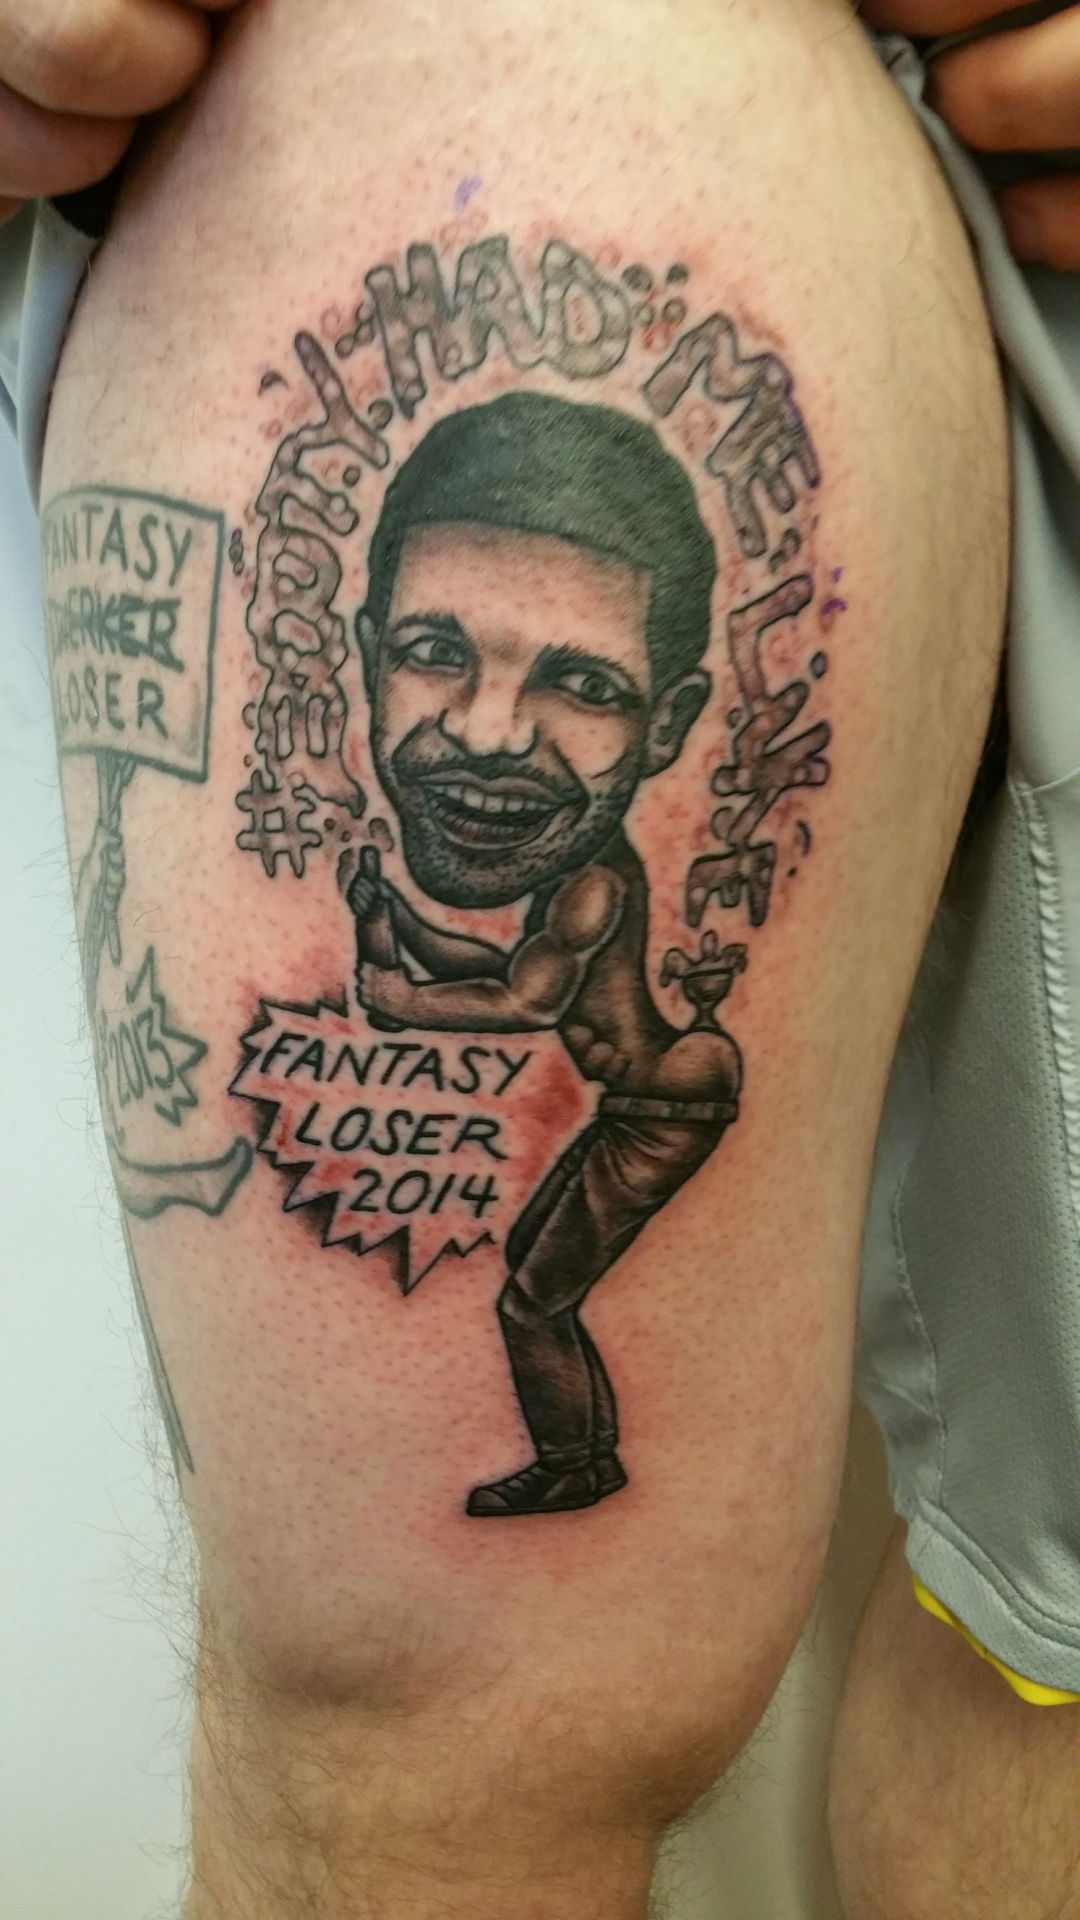 Lose in this Omaha fantasy football league, you might be forced to get a Justin Bieber tattoo